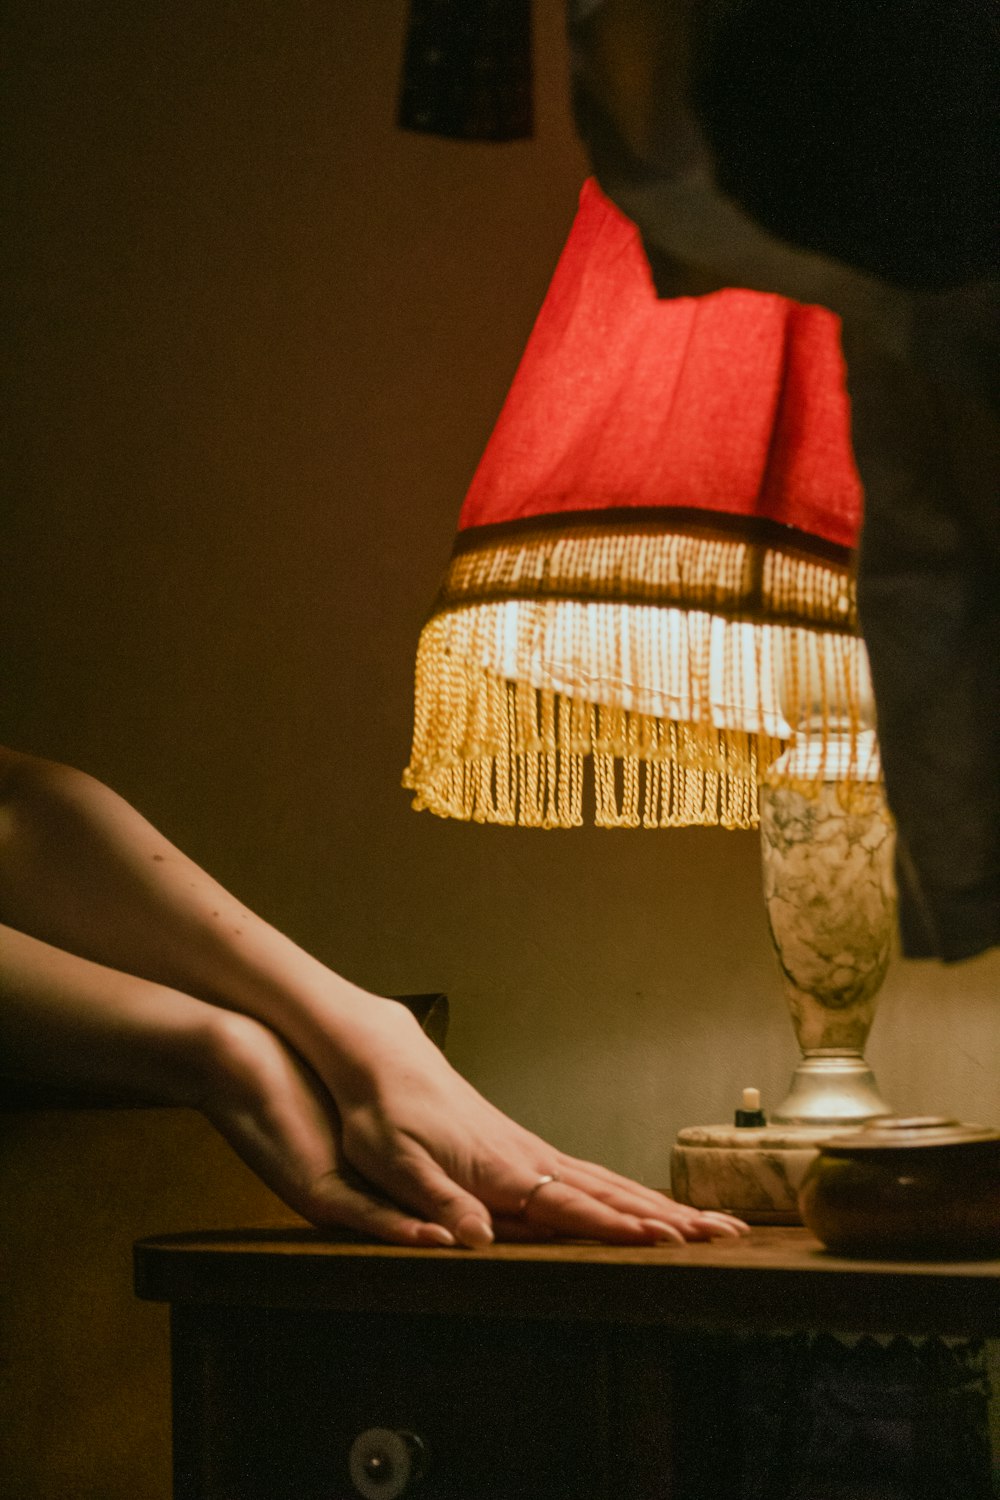 a person's foot resting on a table next to a lamp